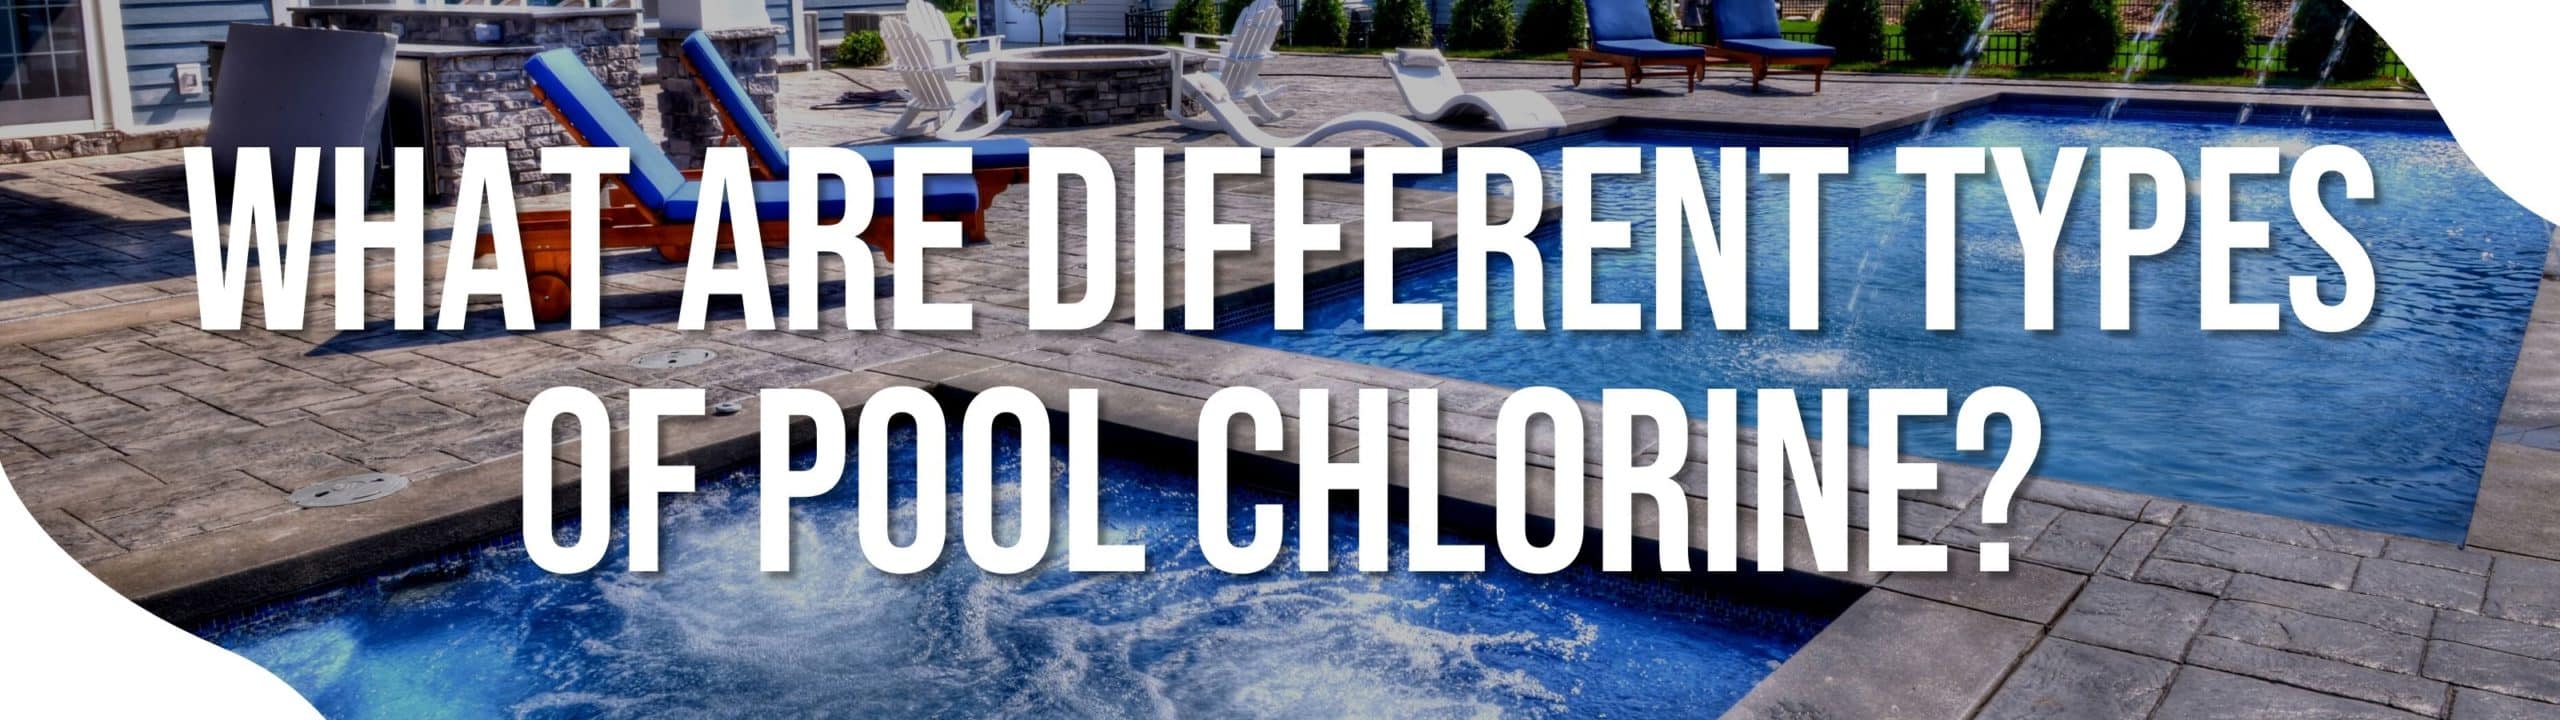 What Are Different Types Of Pool Chlorine